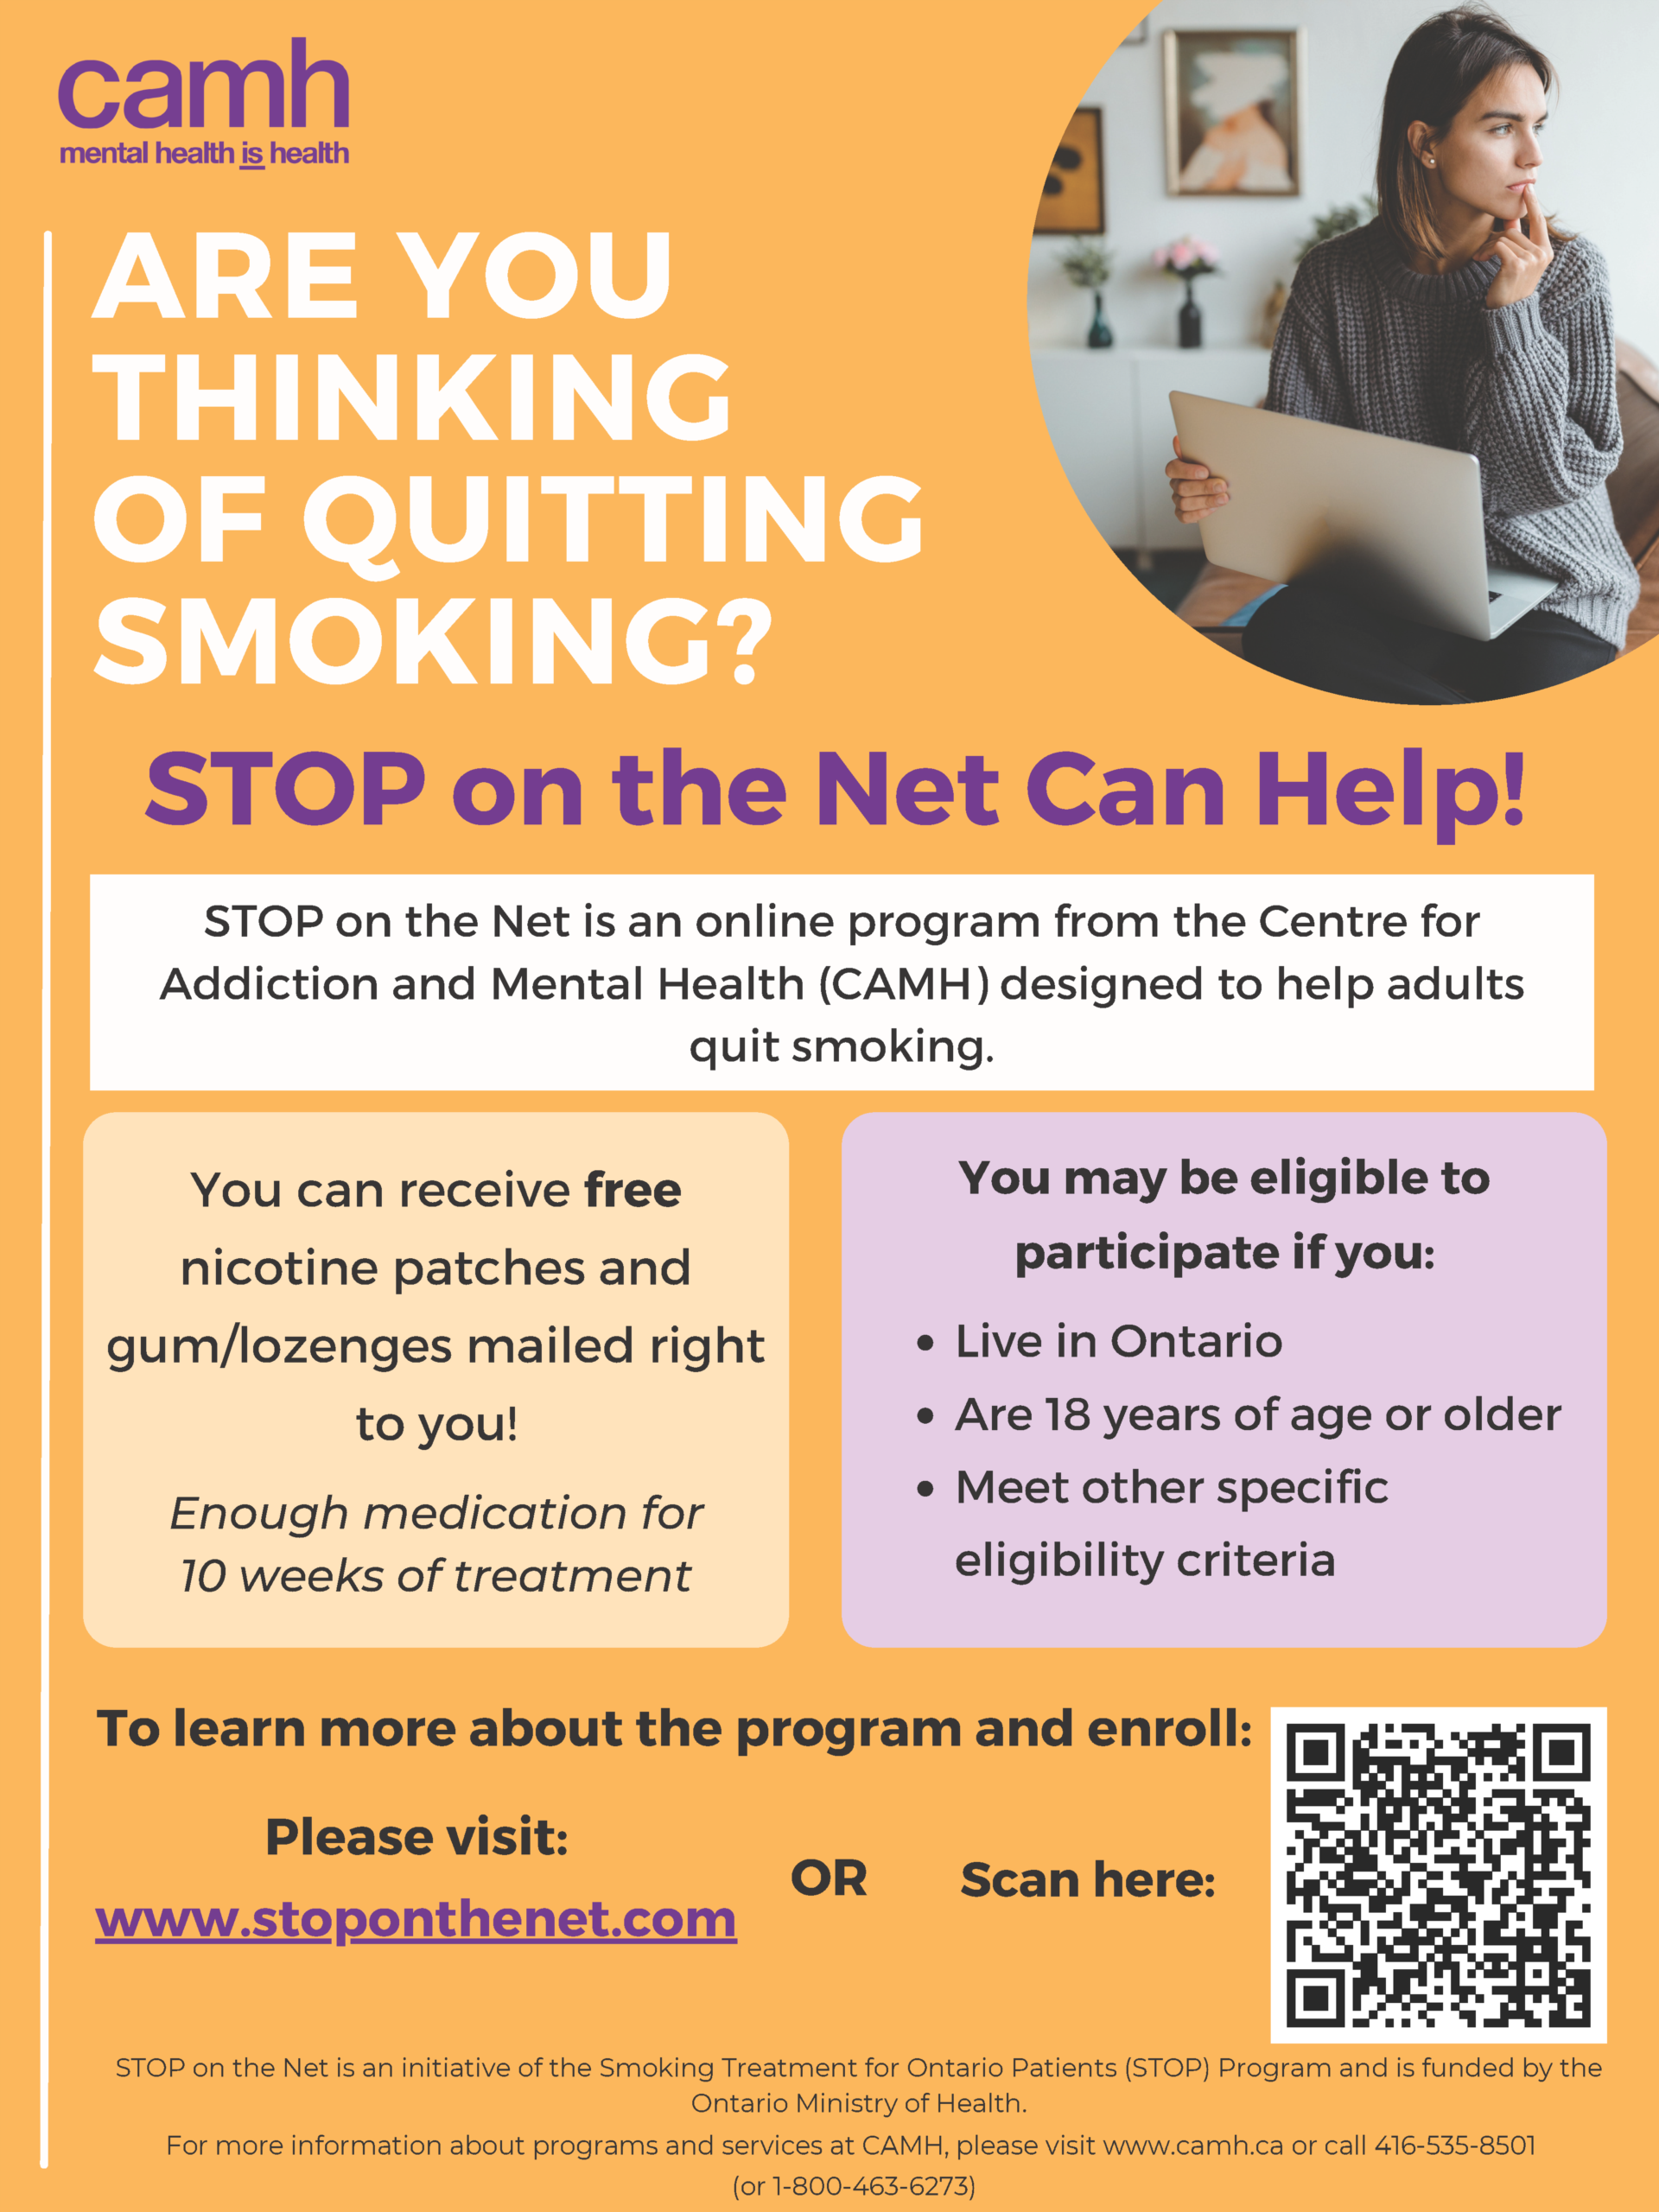 Are you thinking of quitting smoking?